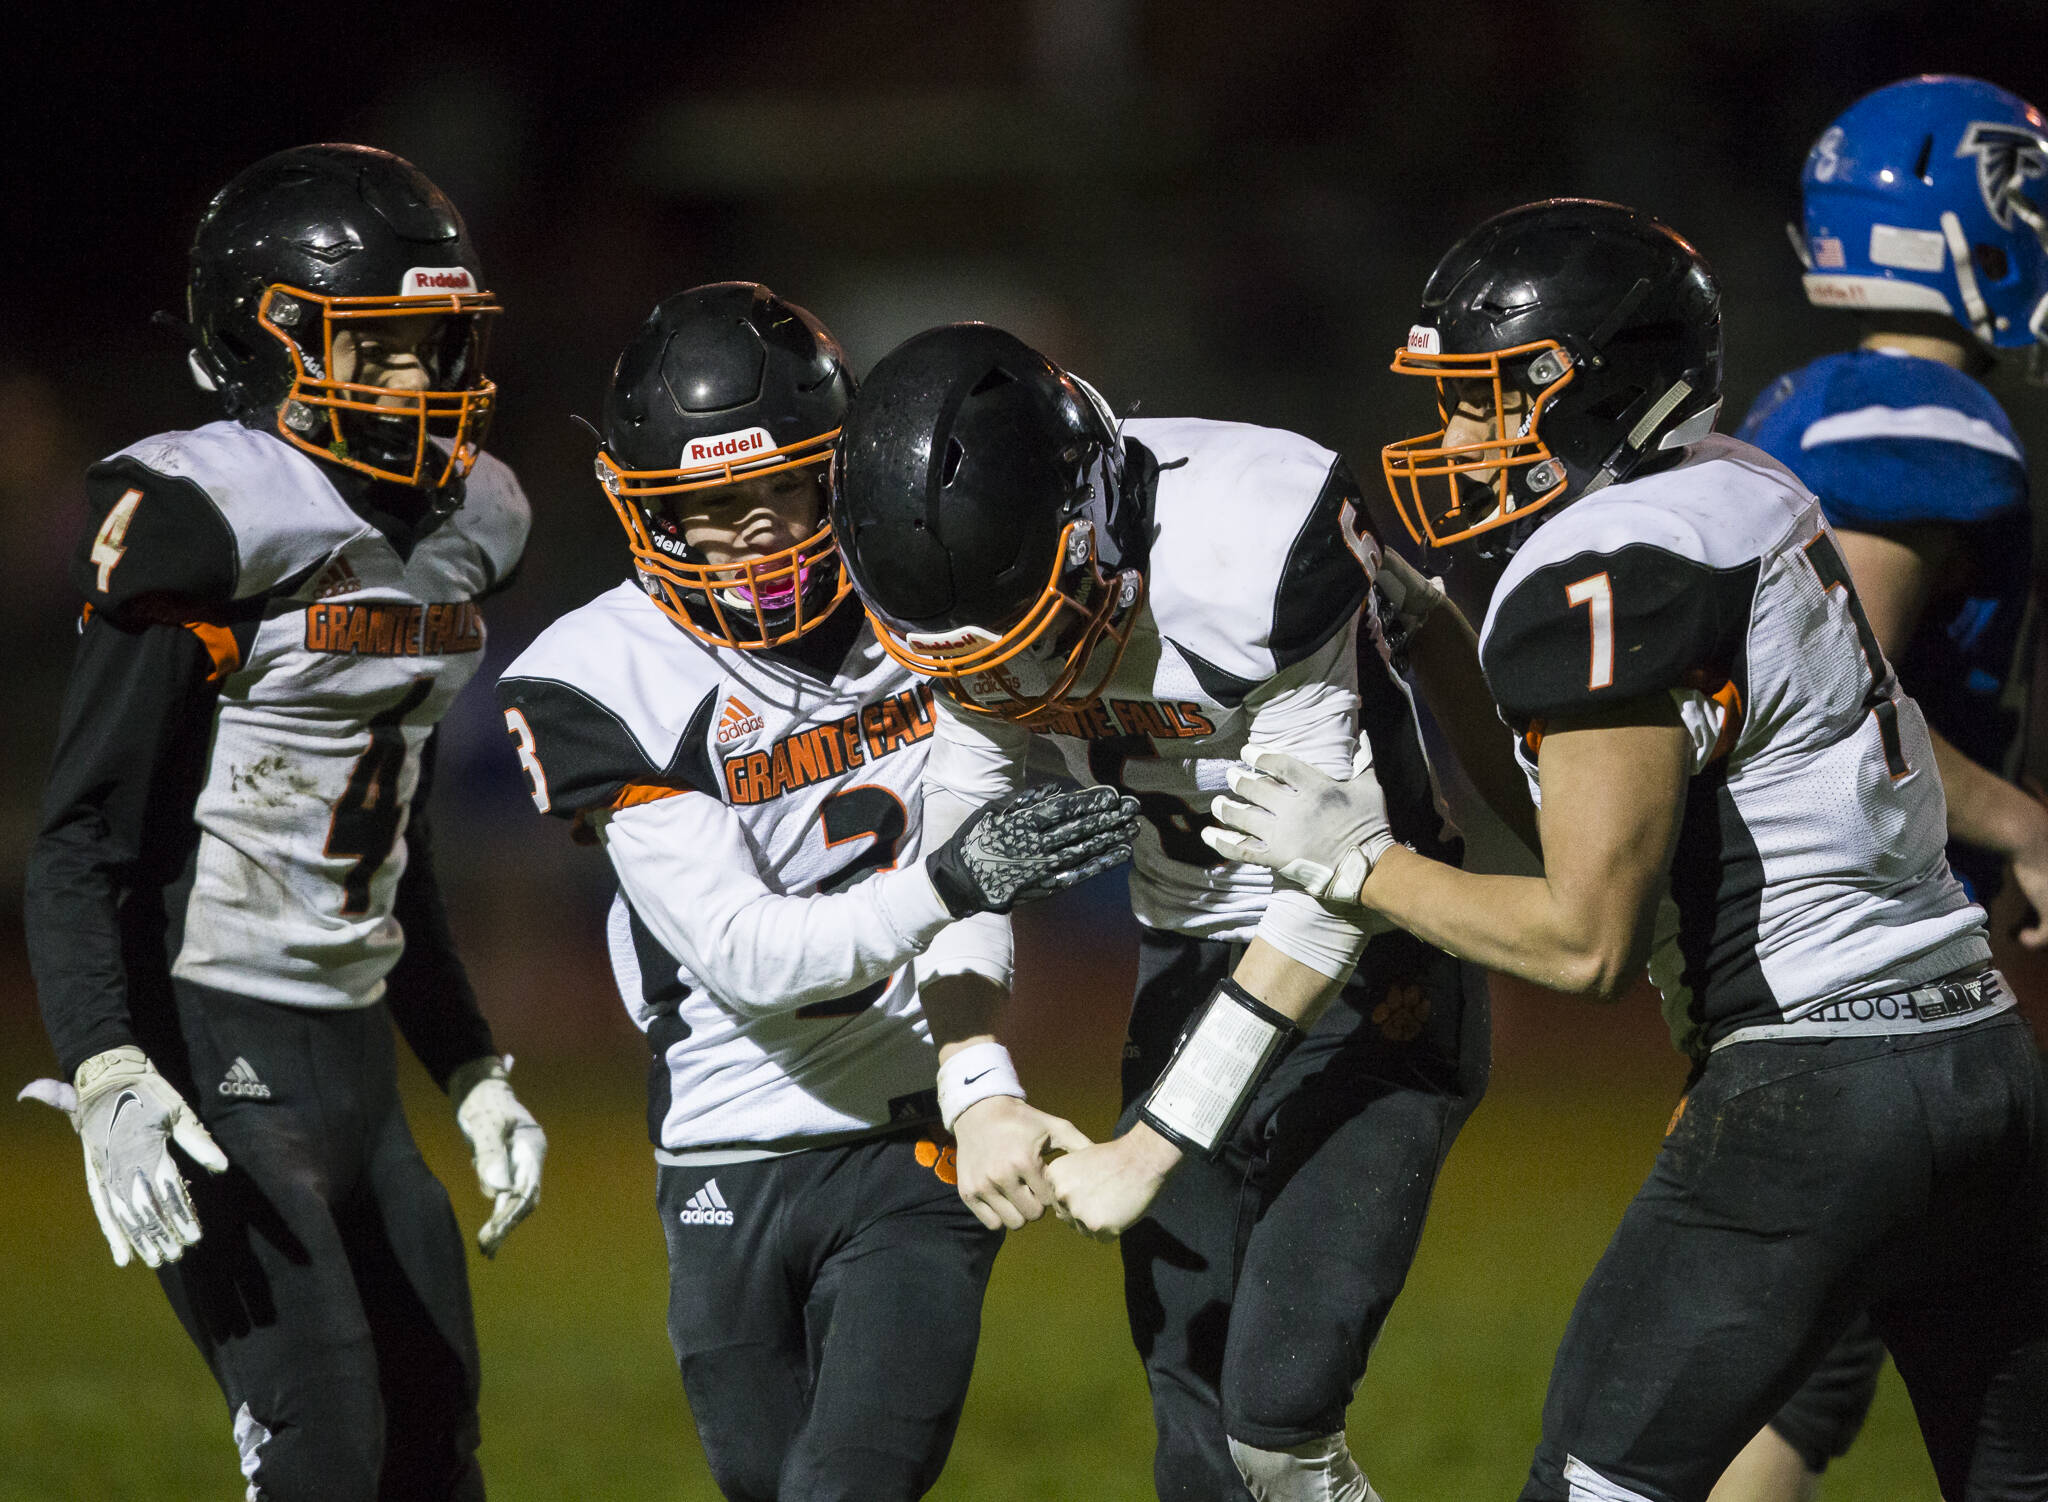 Granite Falls is in the state playoffs for the first time since 1990 and just the second time in program history. (Olivia Vanni / The Herald)